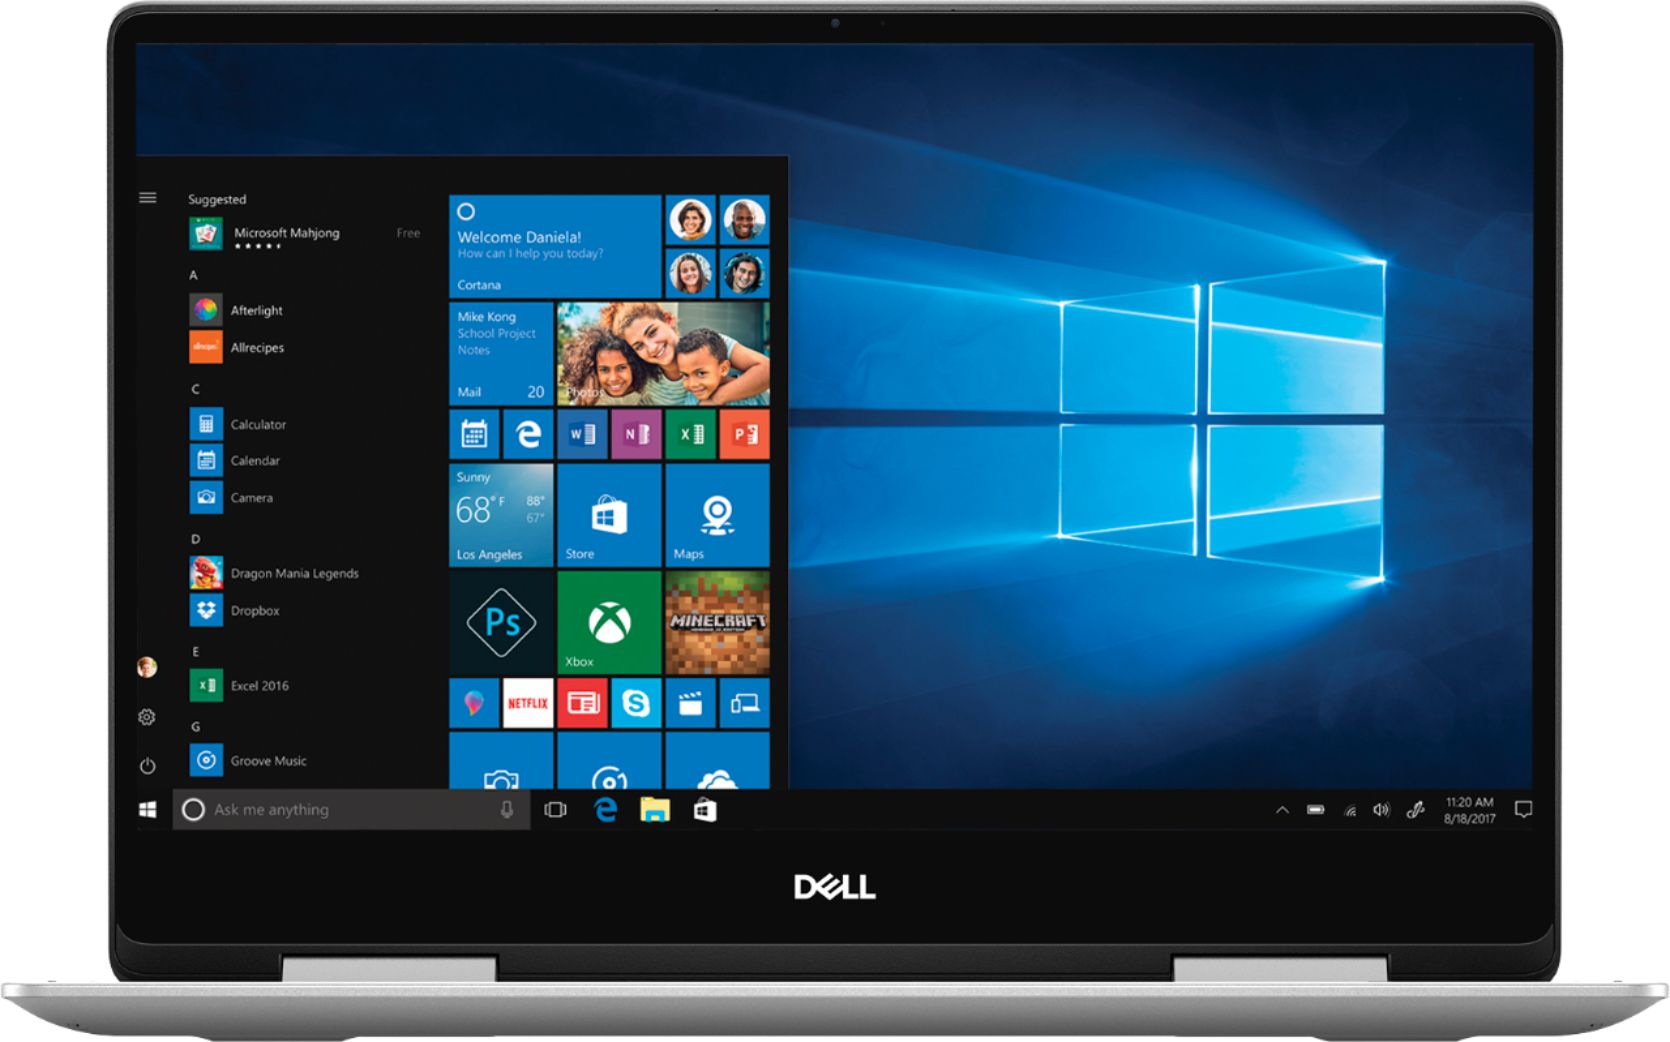 Dell - Inspiron 2-in-1 13.3" Touch-Screen Laptop - Intel Core i5 - 8GB Memory - 256GB Solid State Drive - Silver